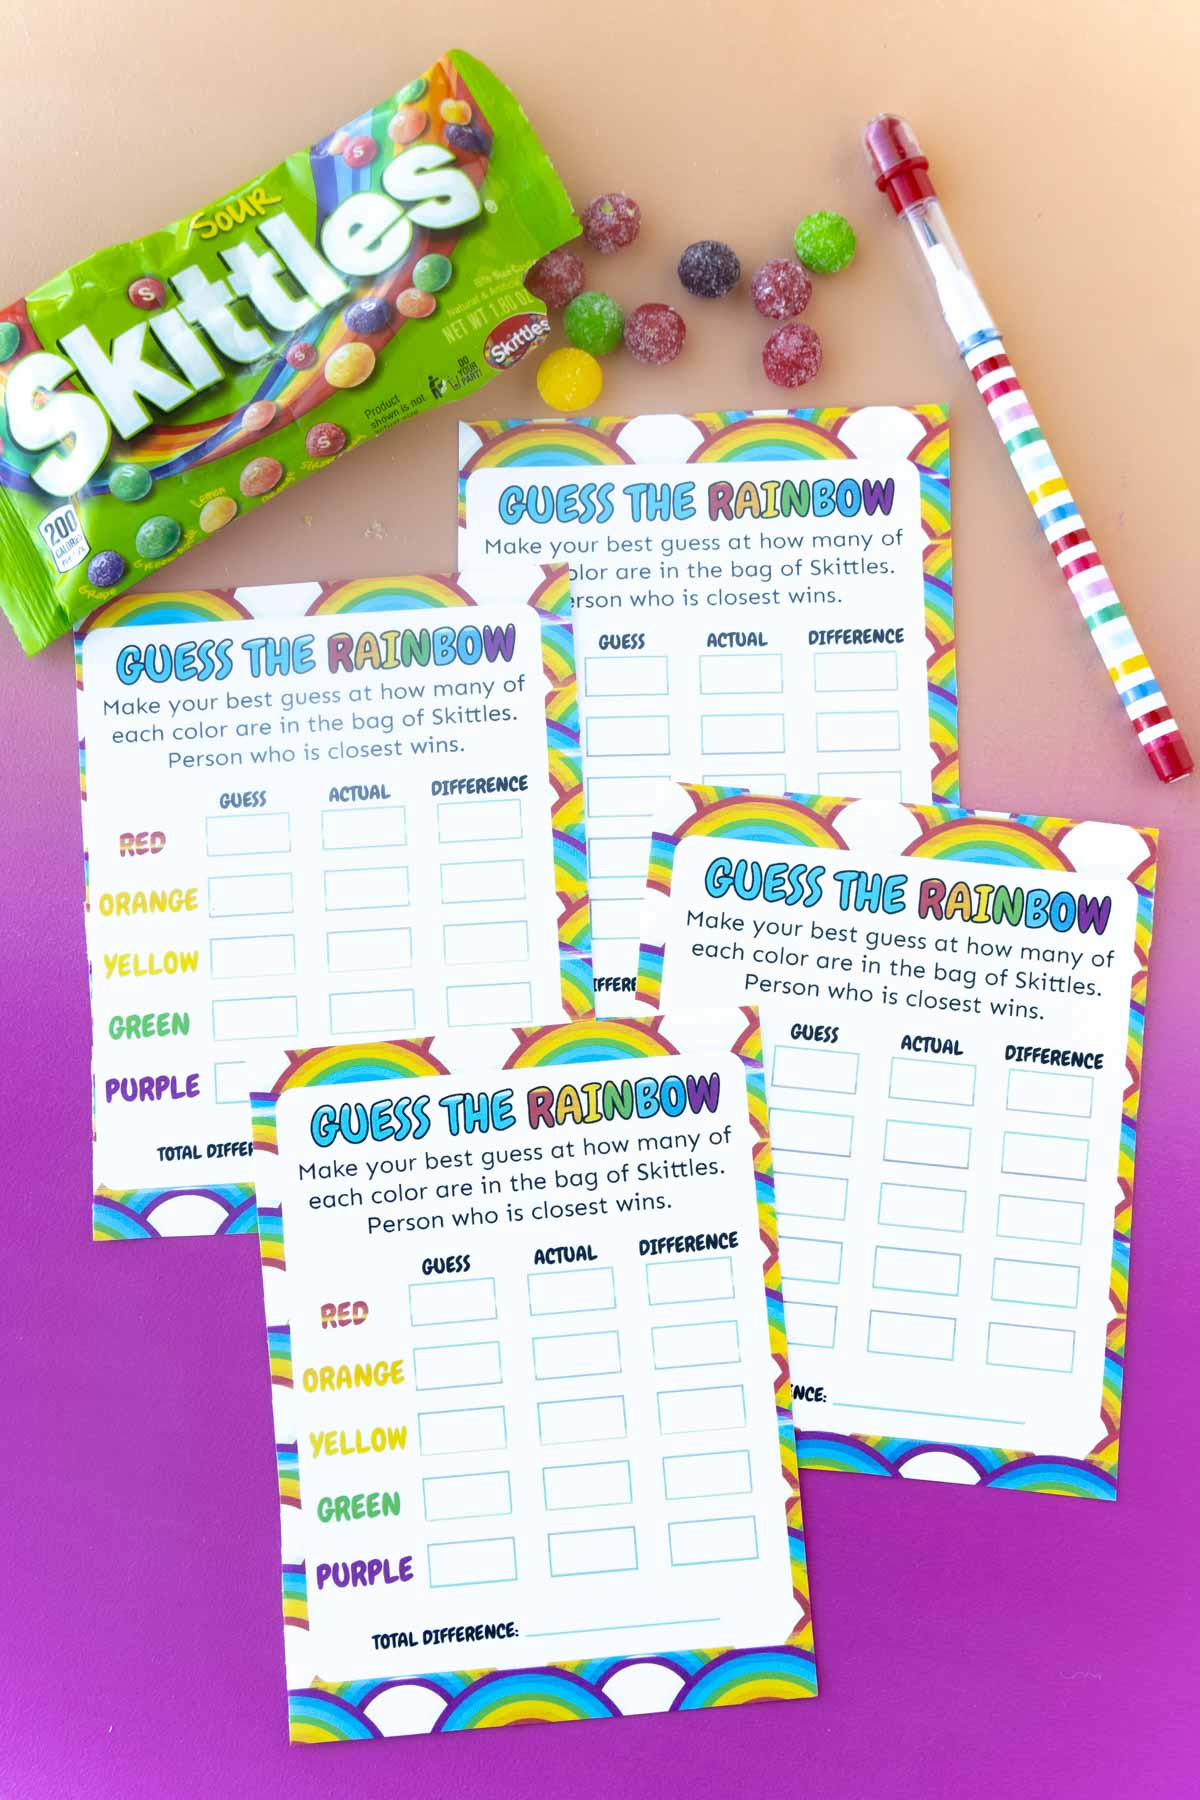 Free Printable Guess the Rainbow Game - Play Party Plan